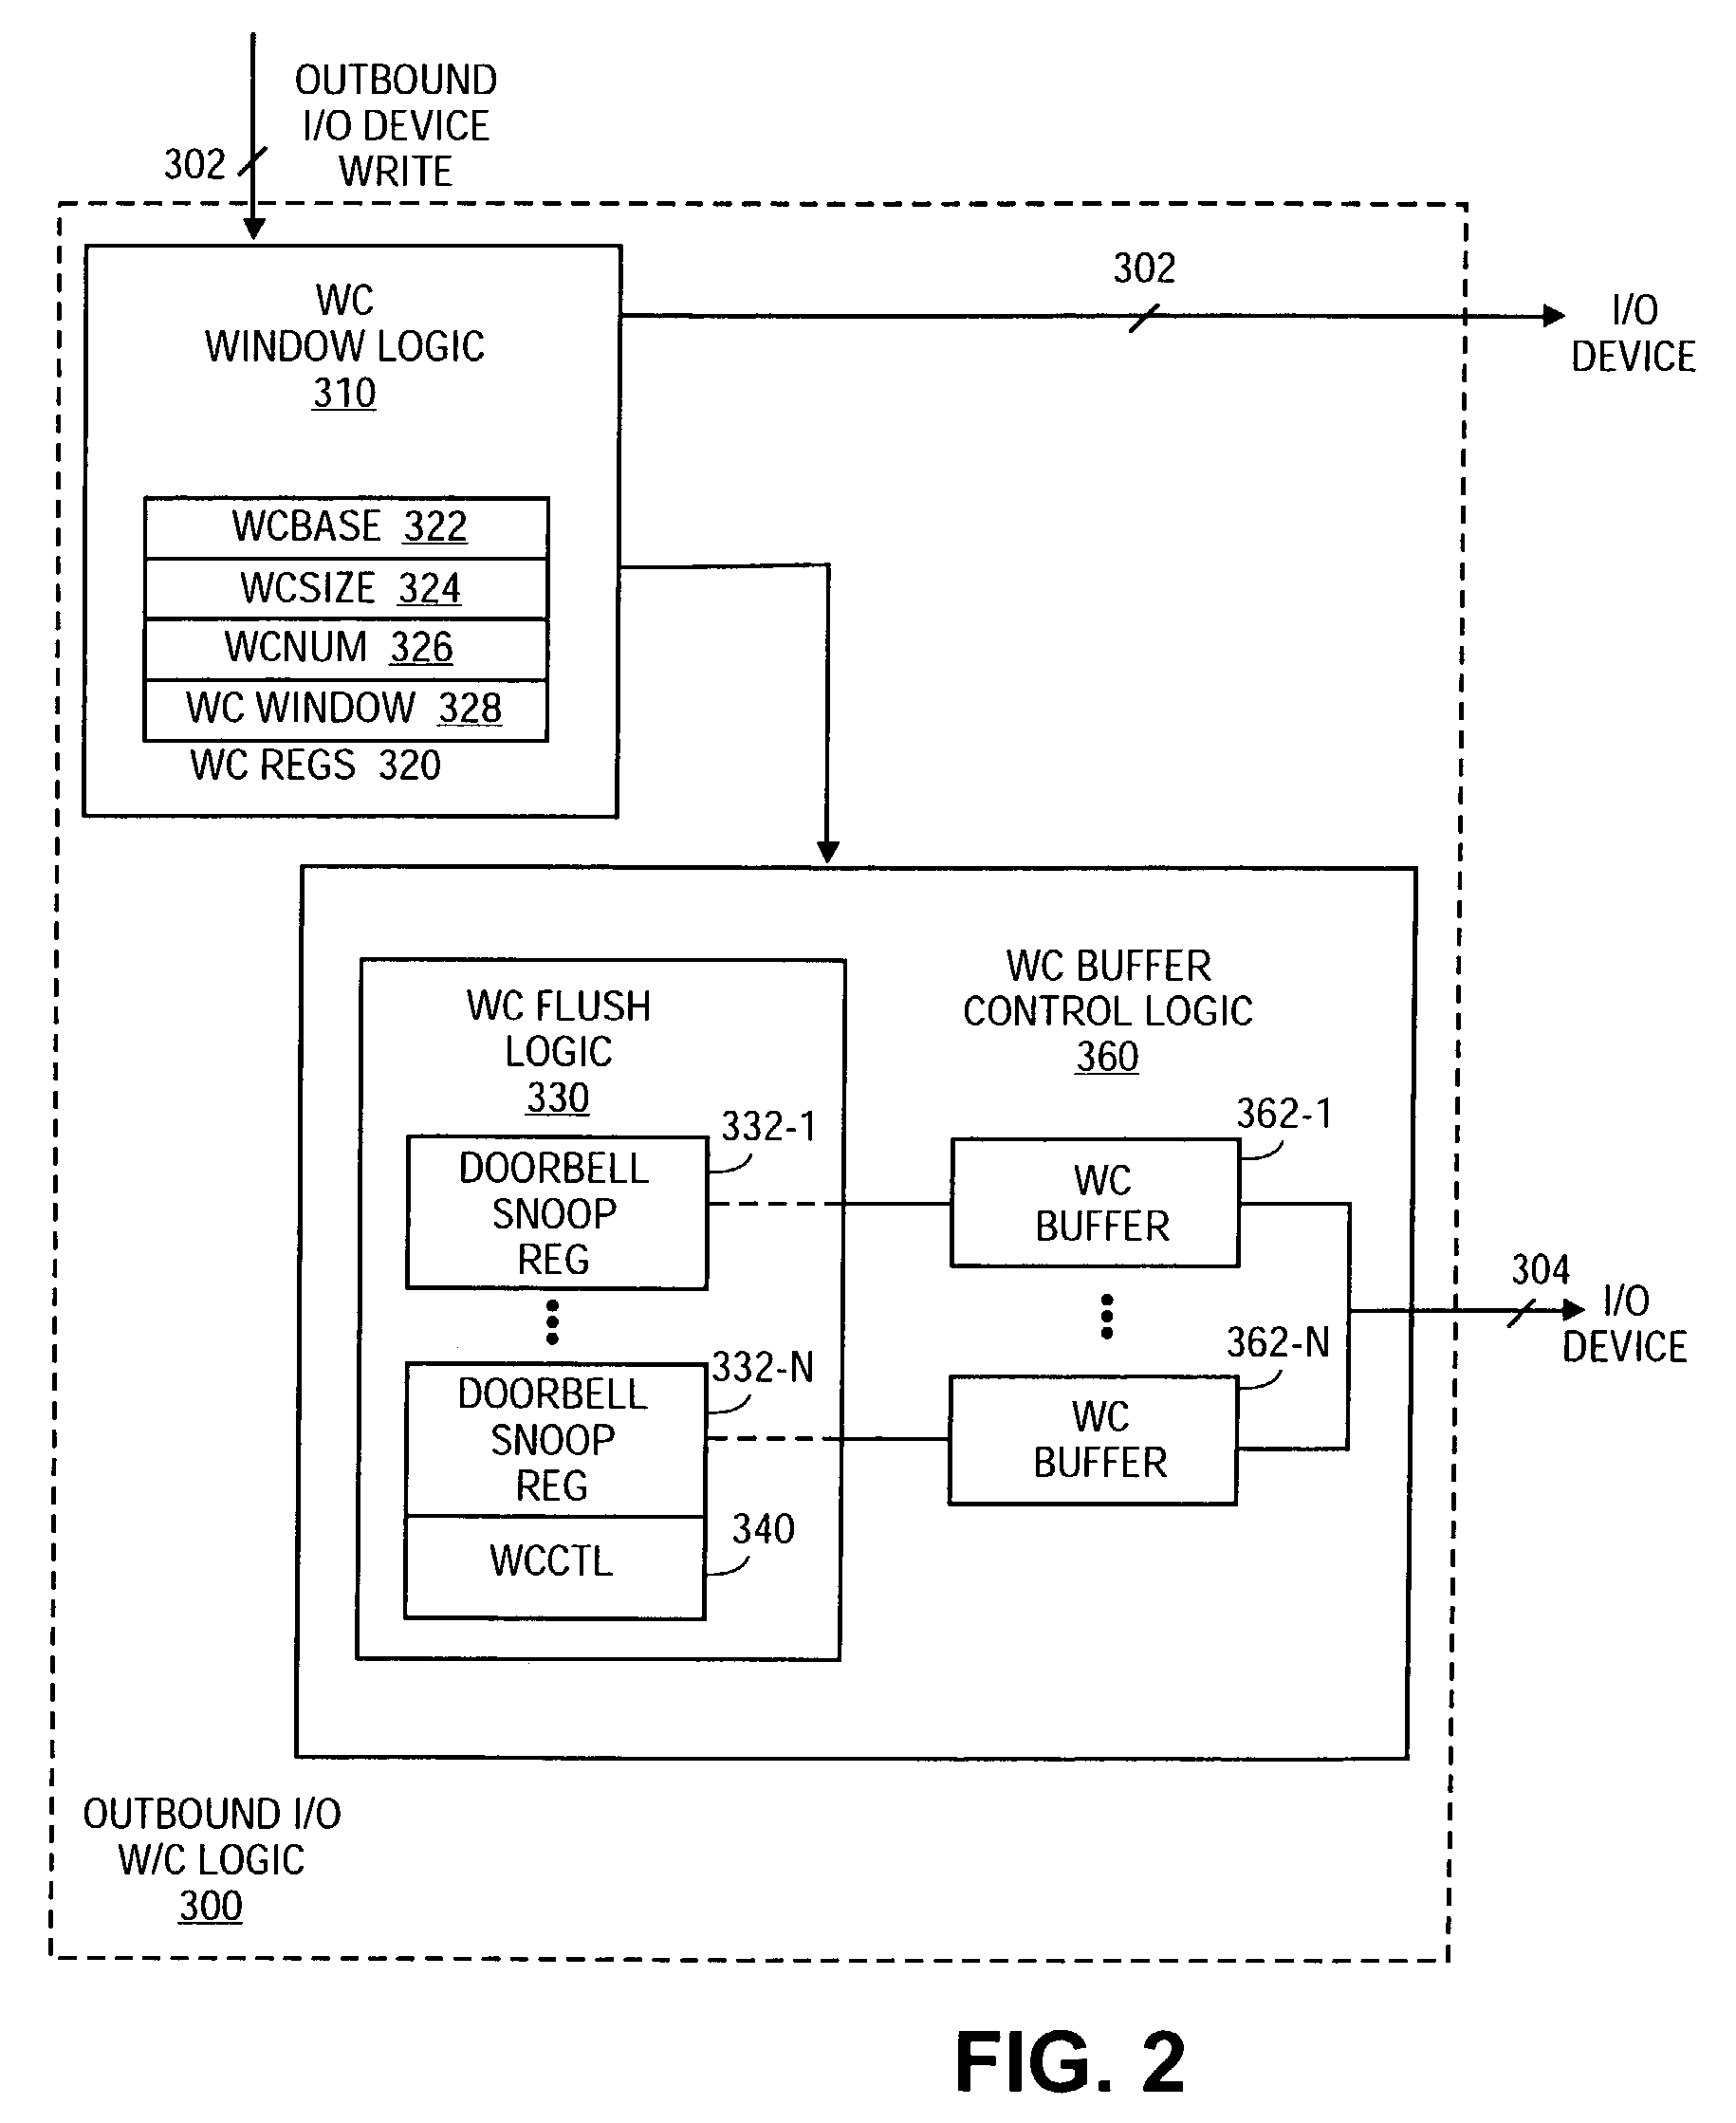 Apparatus and method for combining writes to I/O